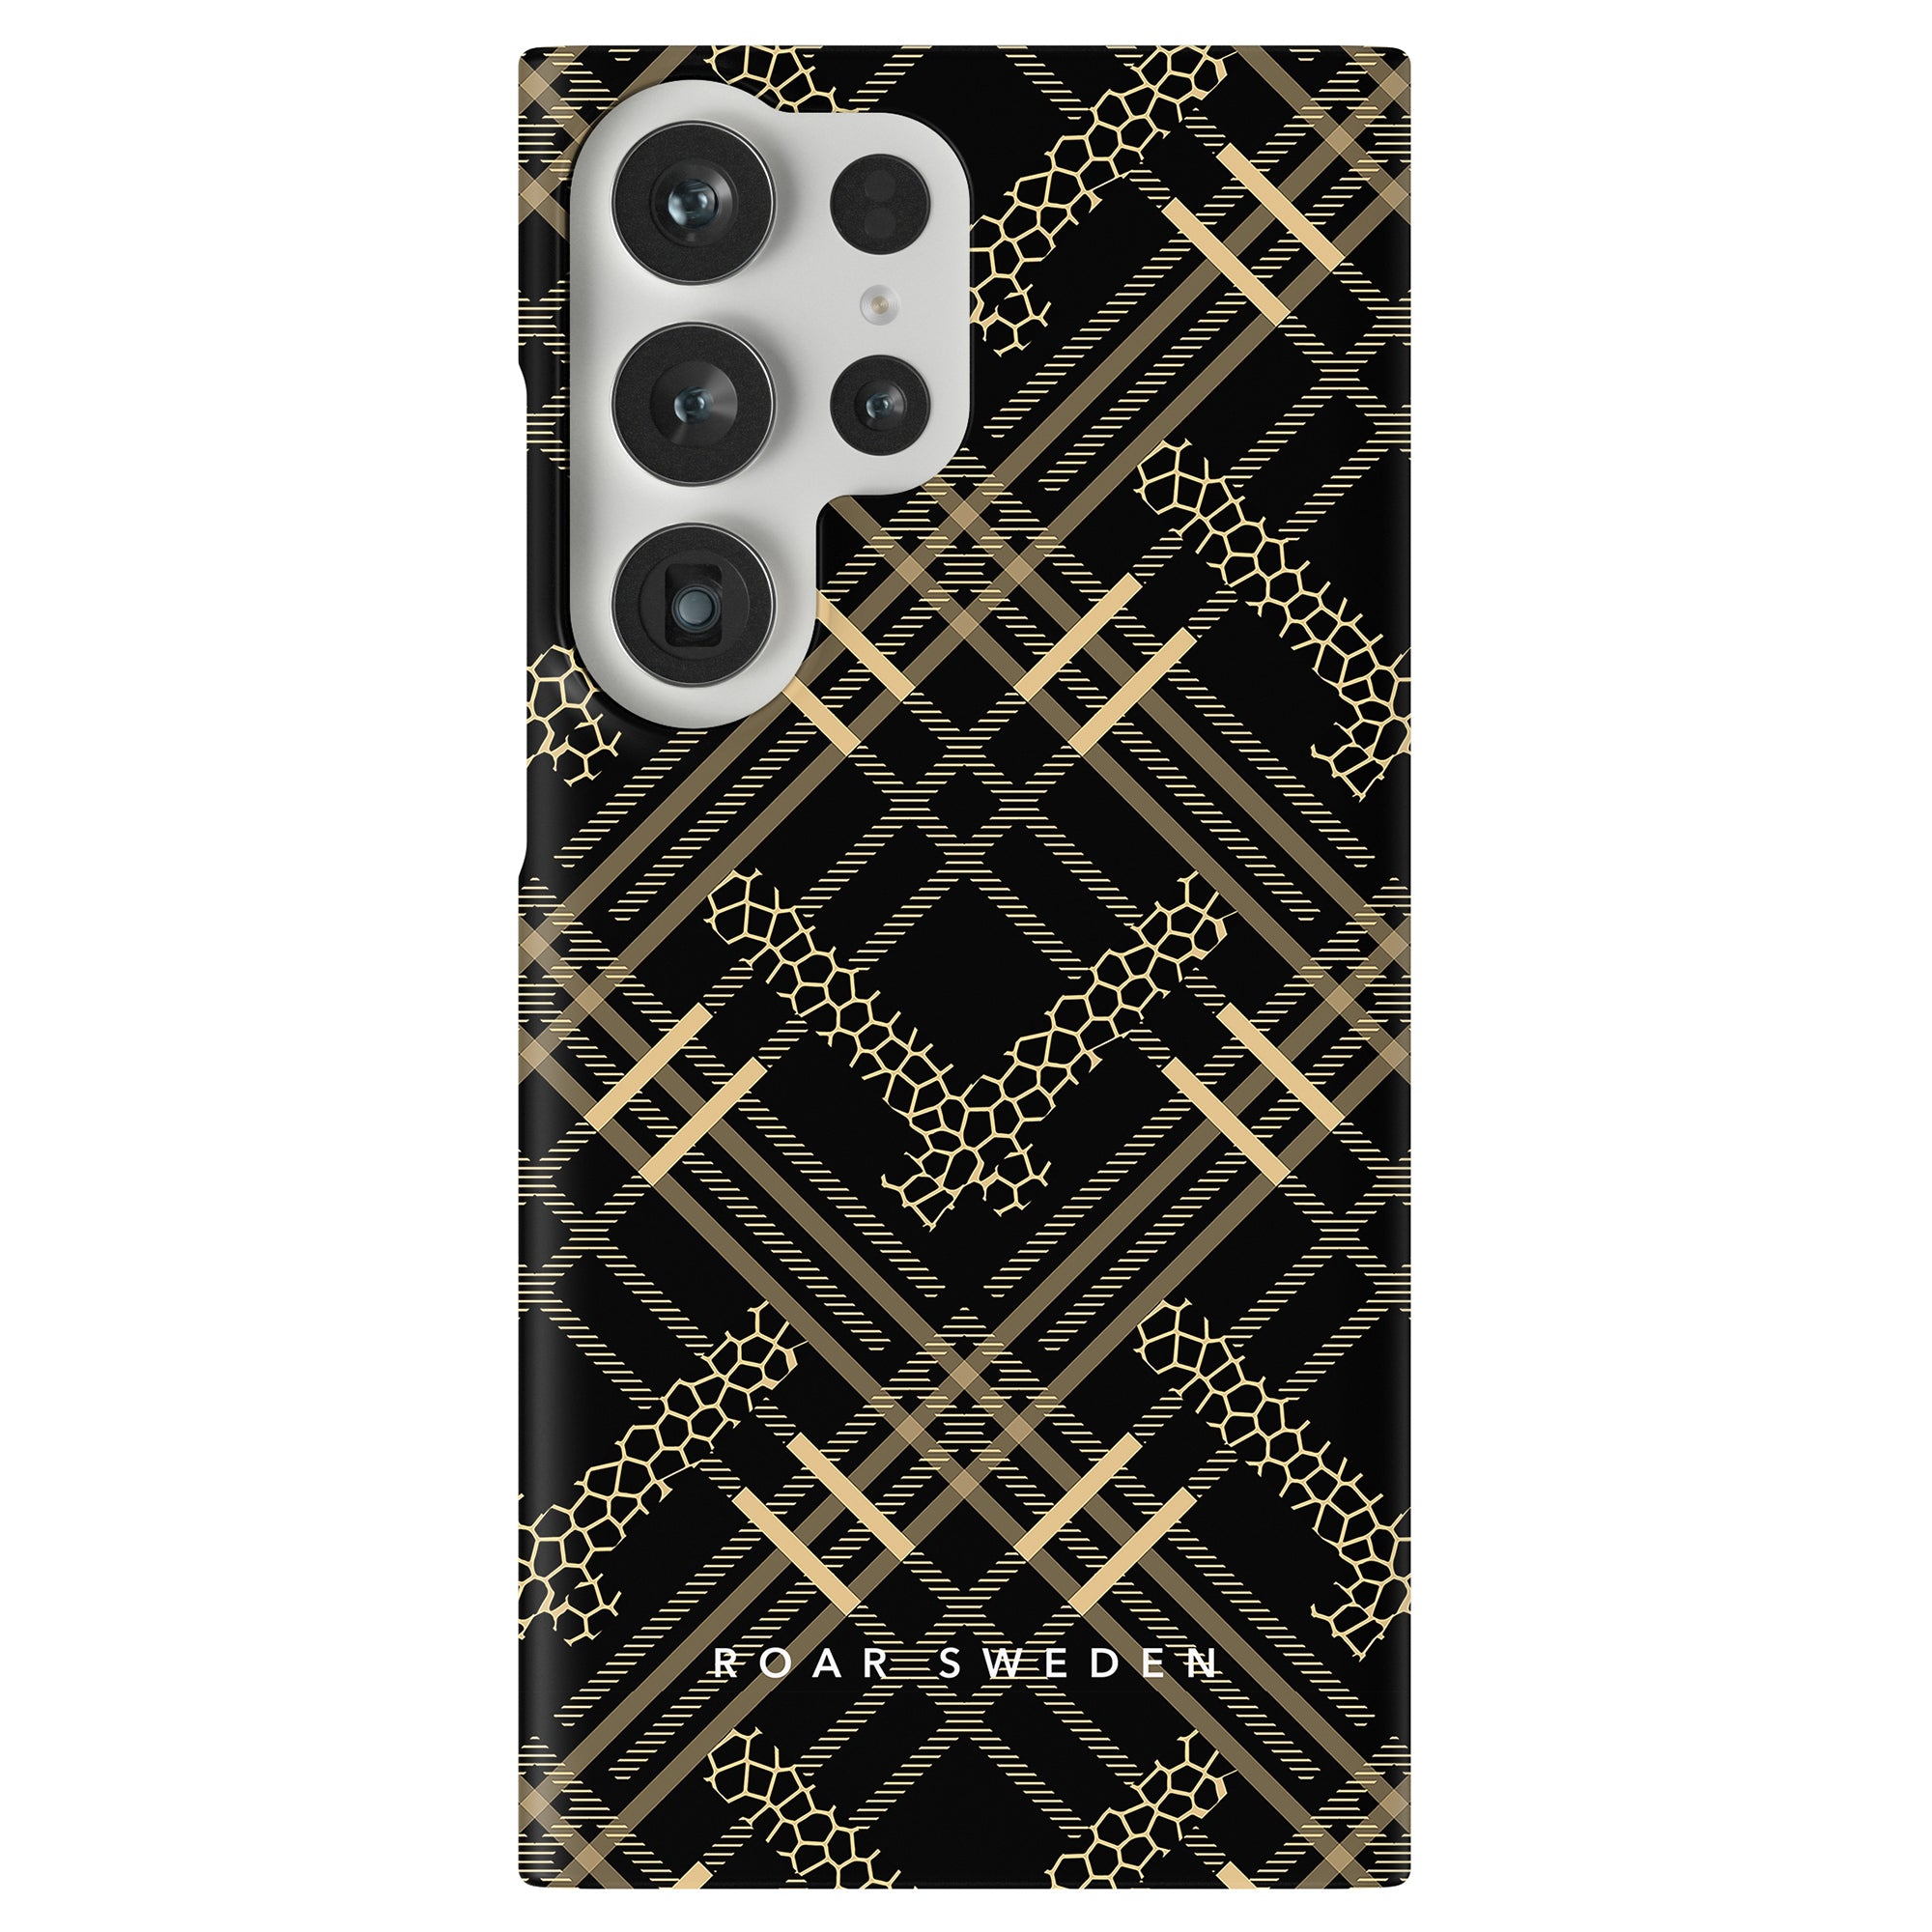 The Tartan Leo - Slim case is a stylish smartphone case featuring a plaid pattern in black and gold.